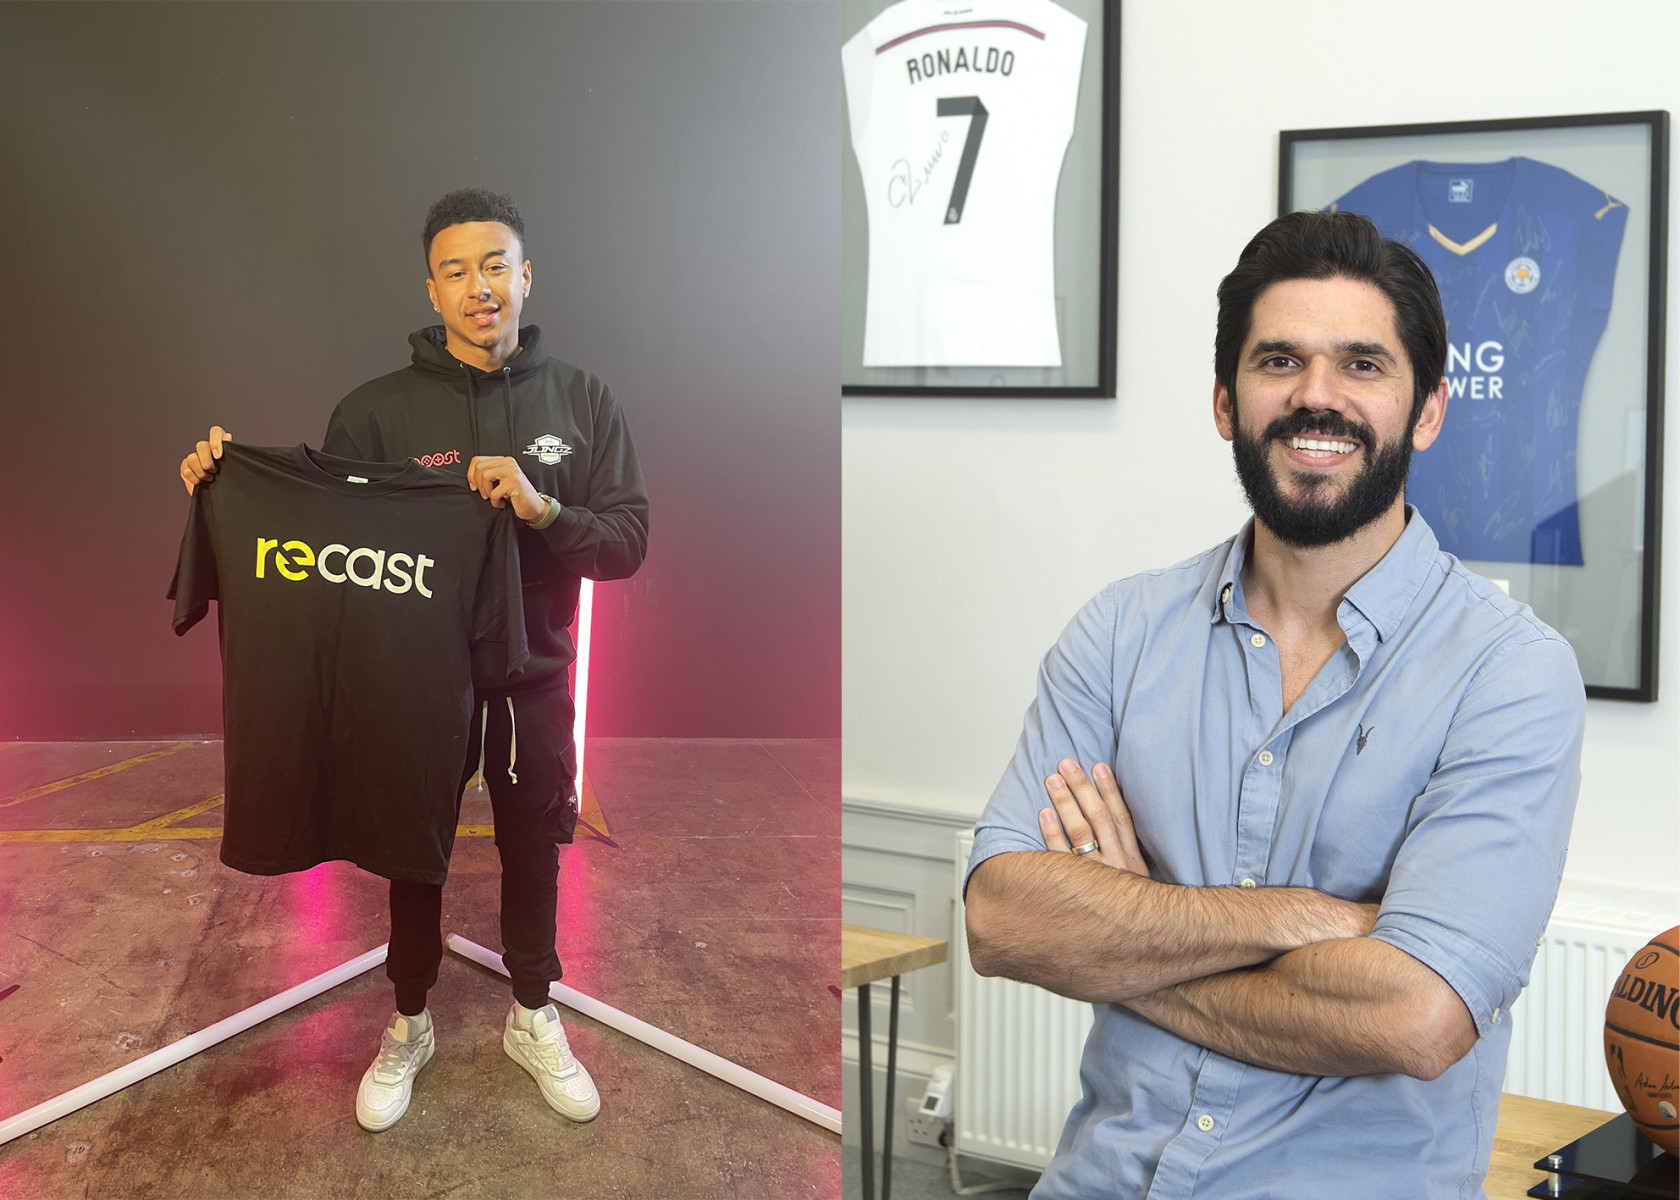 JLINGZ esports teams up with Recast